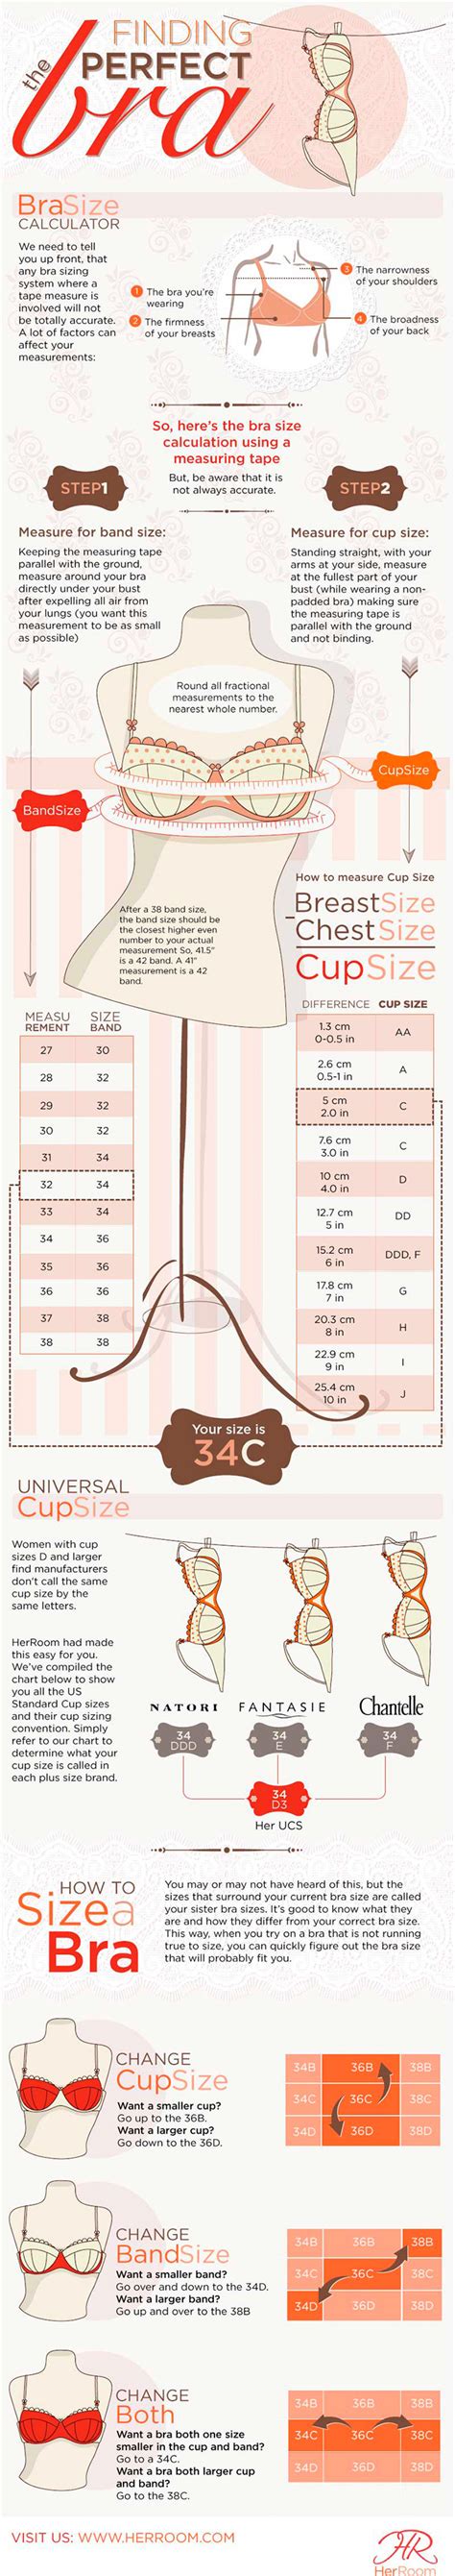 Learn how to measure bra size and check your bra cup size in the chart given here for perfect bra fitting. Finding The Perfect Bra | Visual.ly